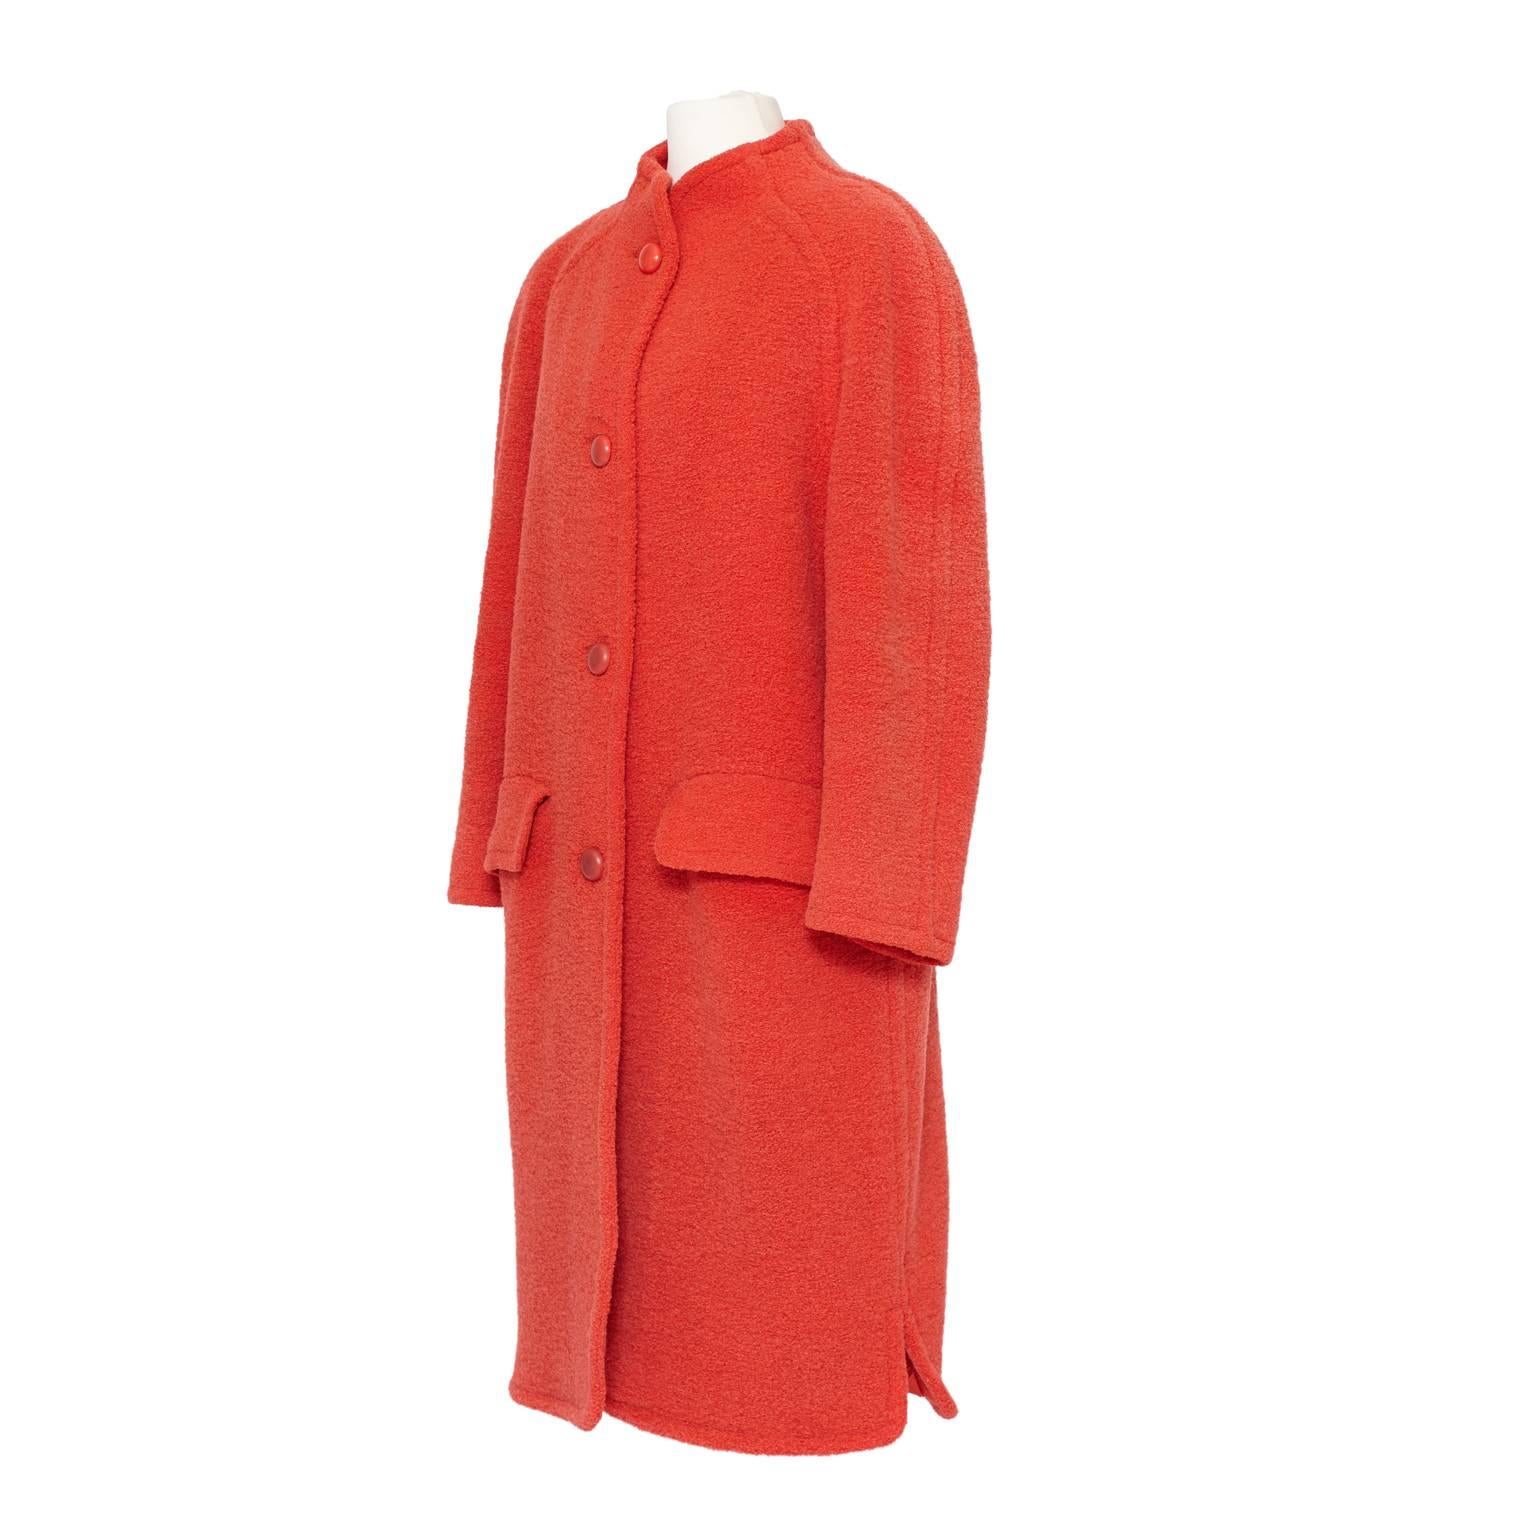 Courreges iconic orange red coat from 1970's. Constructed raglan sleeve alpaca coat featuring sewn in flap pockets with center front button closure, fully lined. Rounded rectangle hem front and sides with cover stitches.
Made in France. 
Original